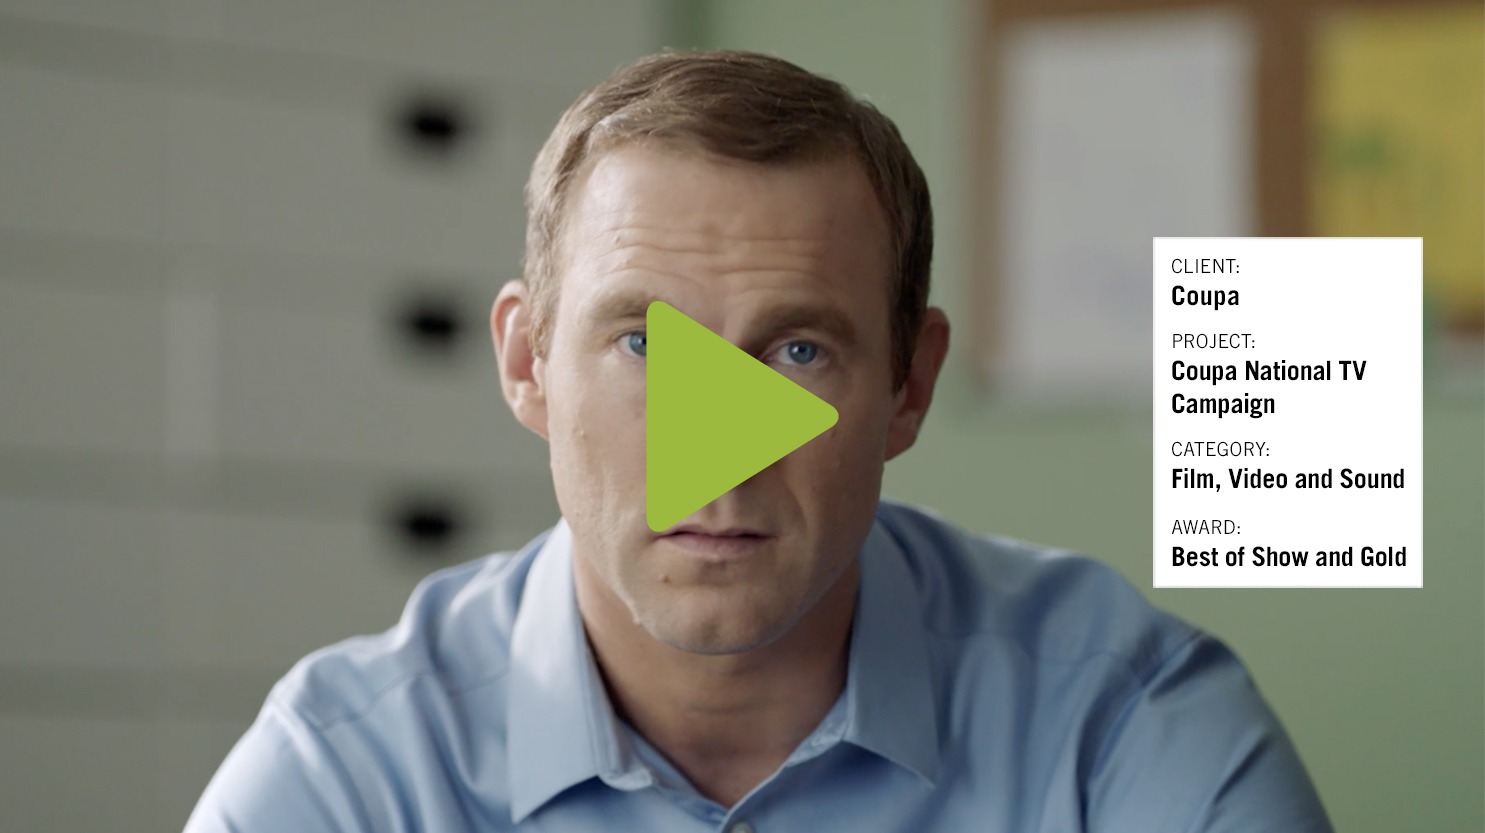 Coupa National TV Campaign